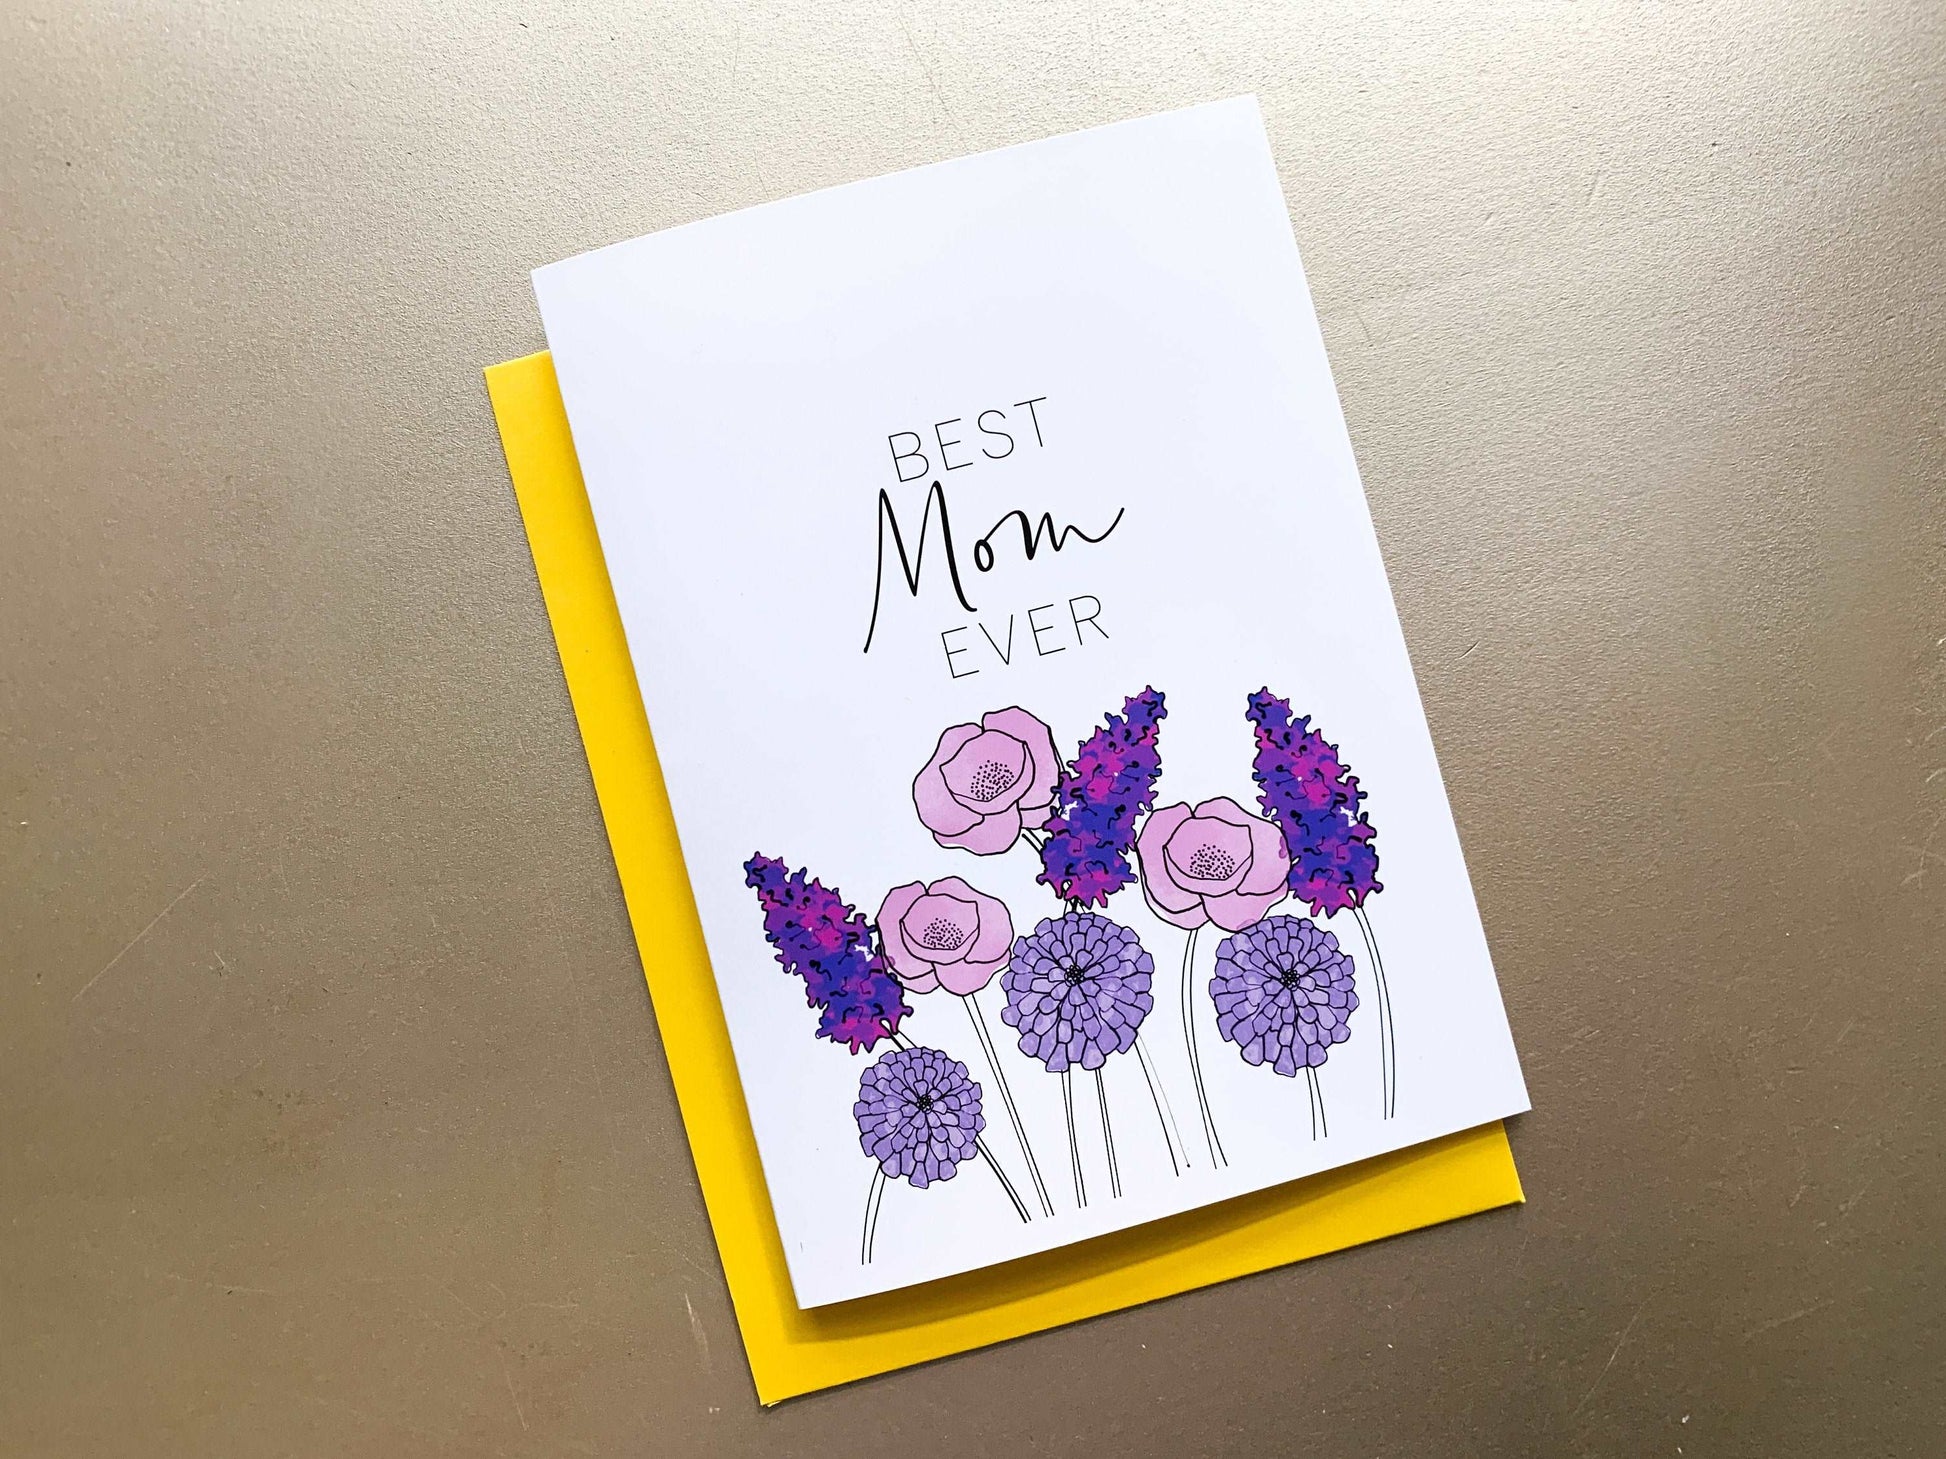 Best Mom Ever Handmade Mother's Day Card by StoneDonut Design